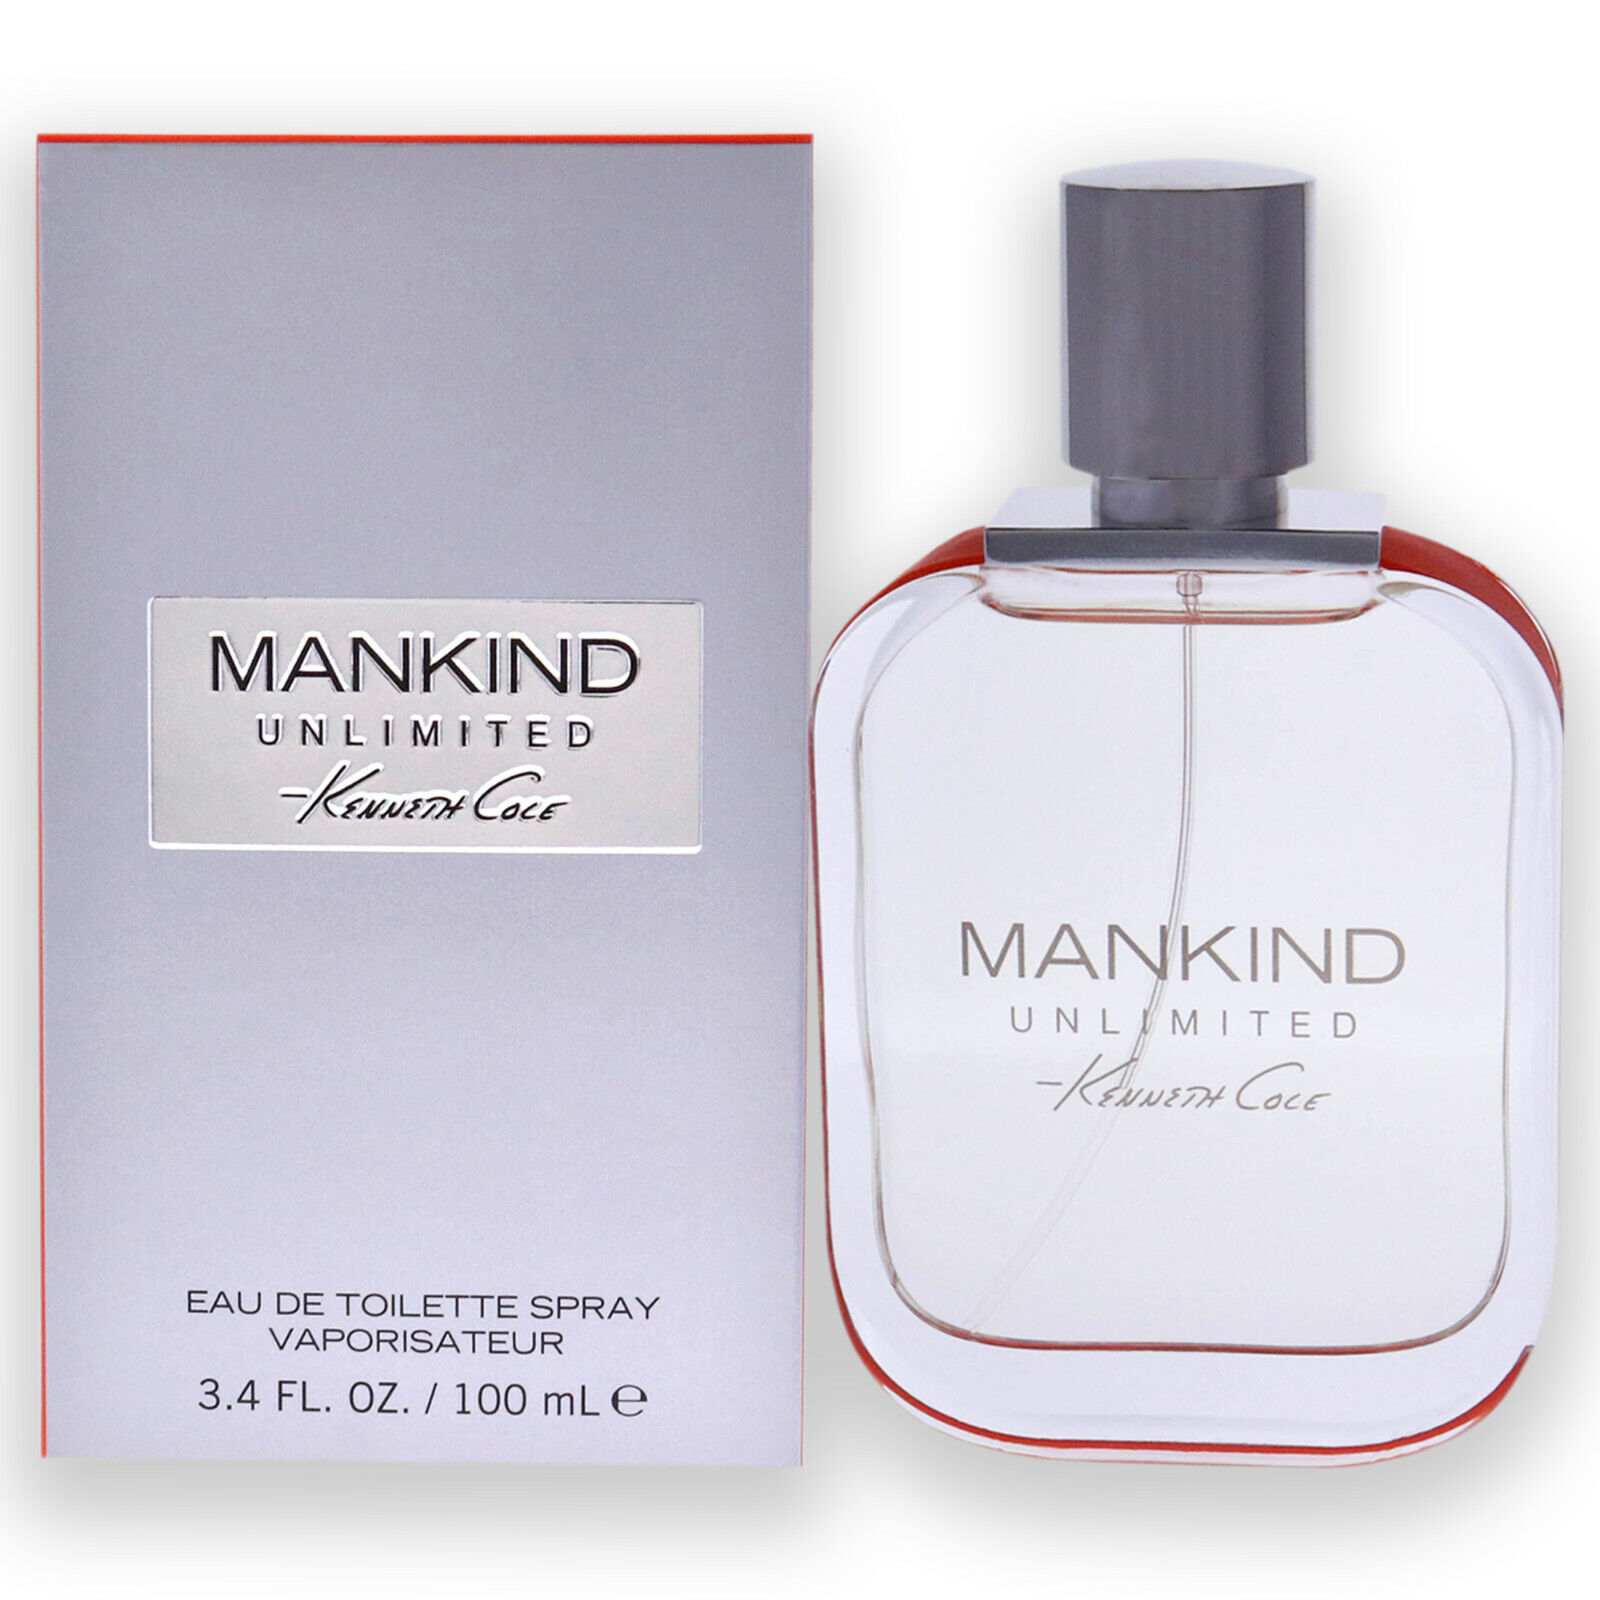 Mankind Unlimited by Kenneth Cole for Men - 3.4 oz EDT Spray